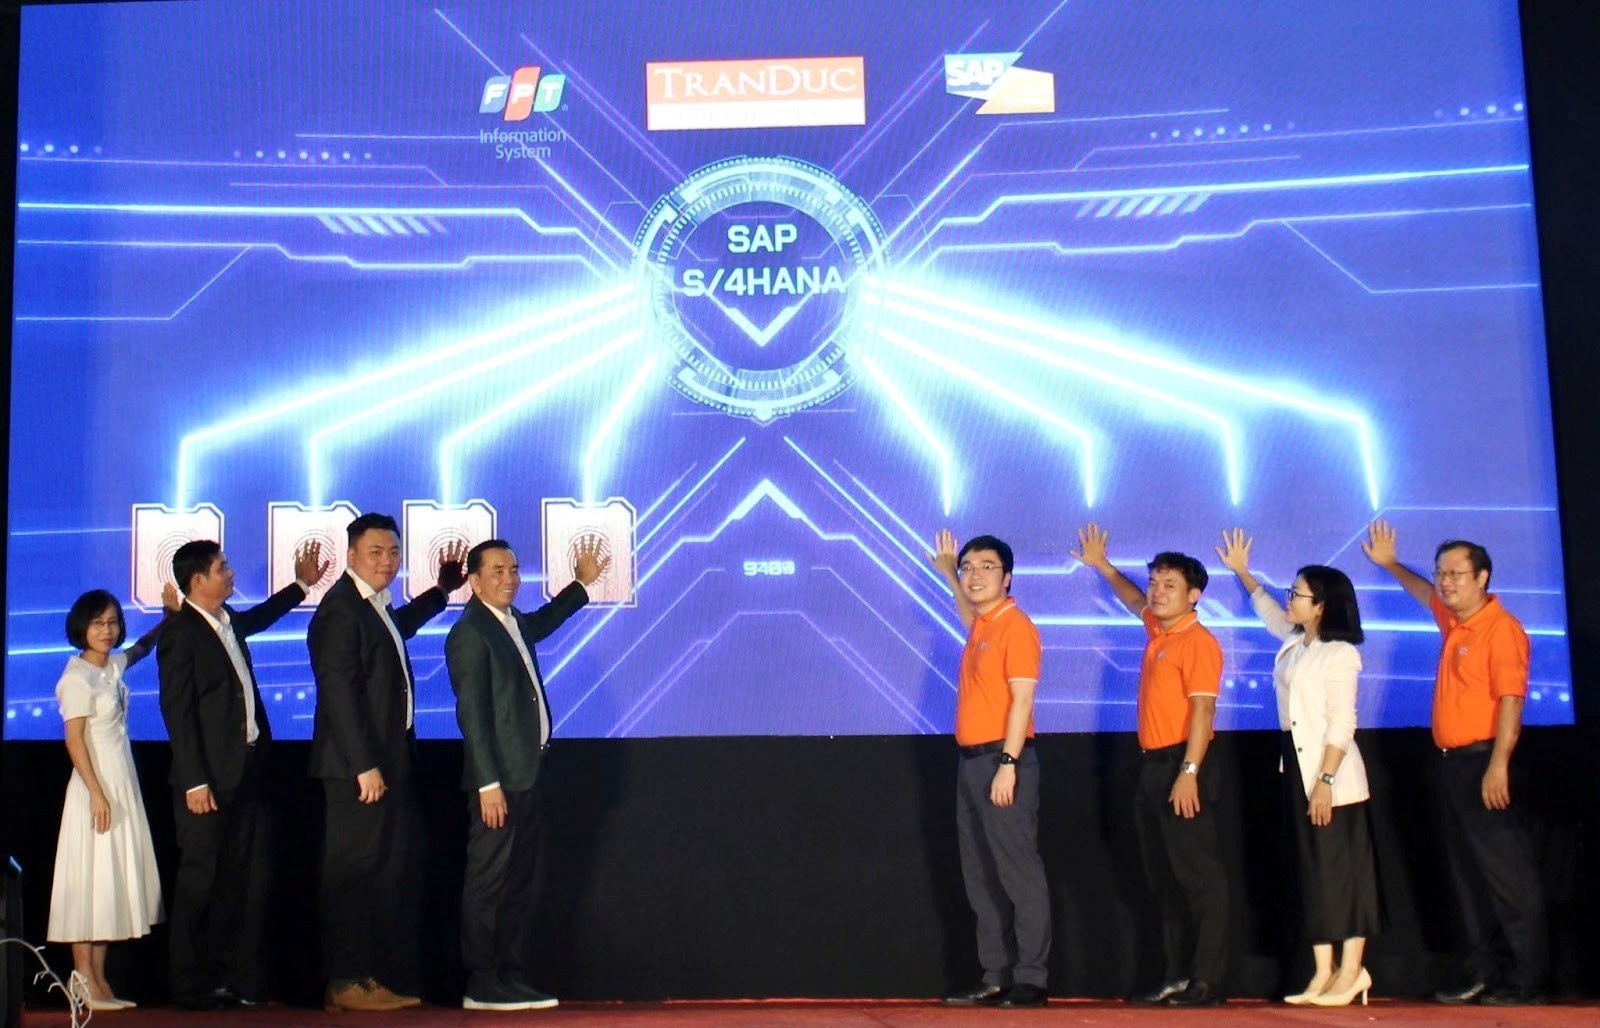 fpt is and tran duc officially implement rise with sap solution